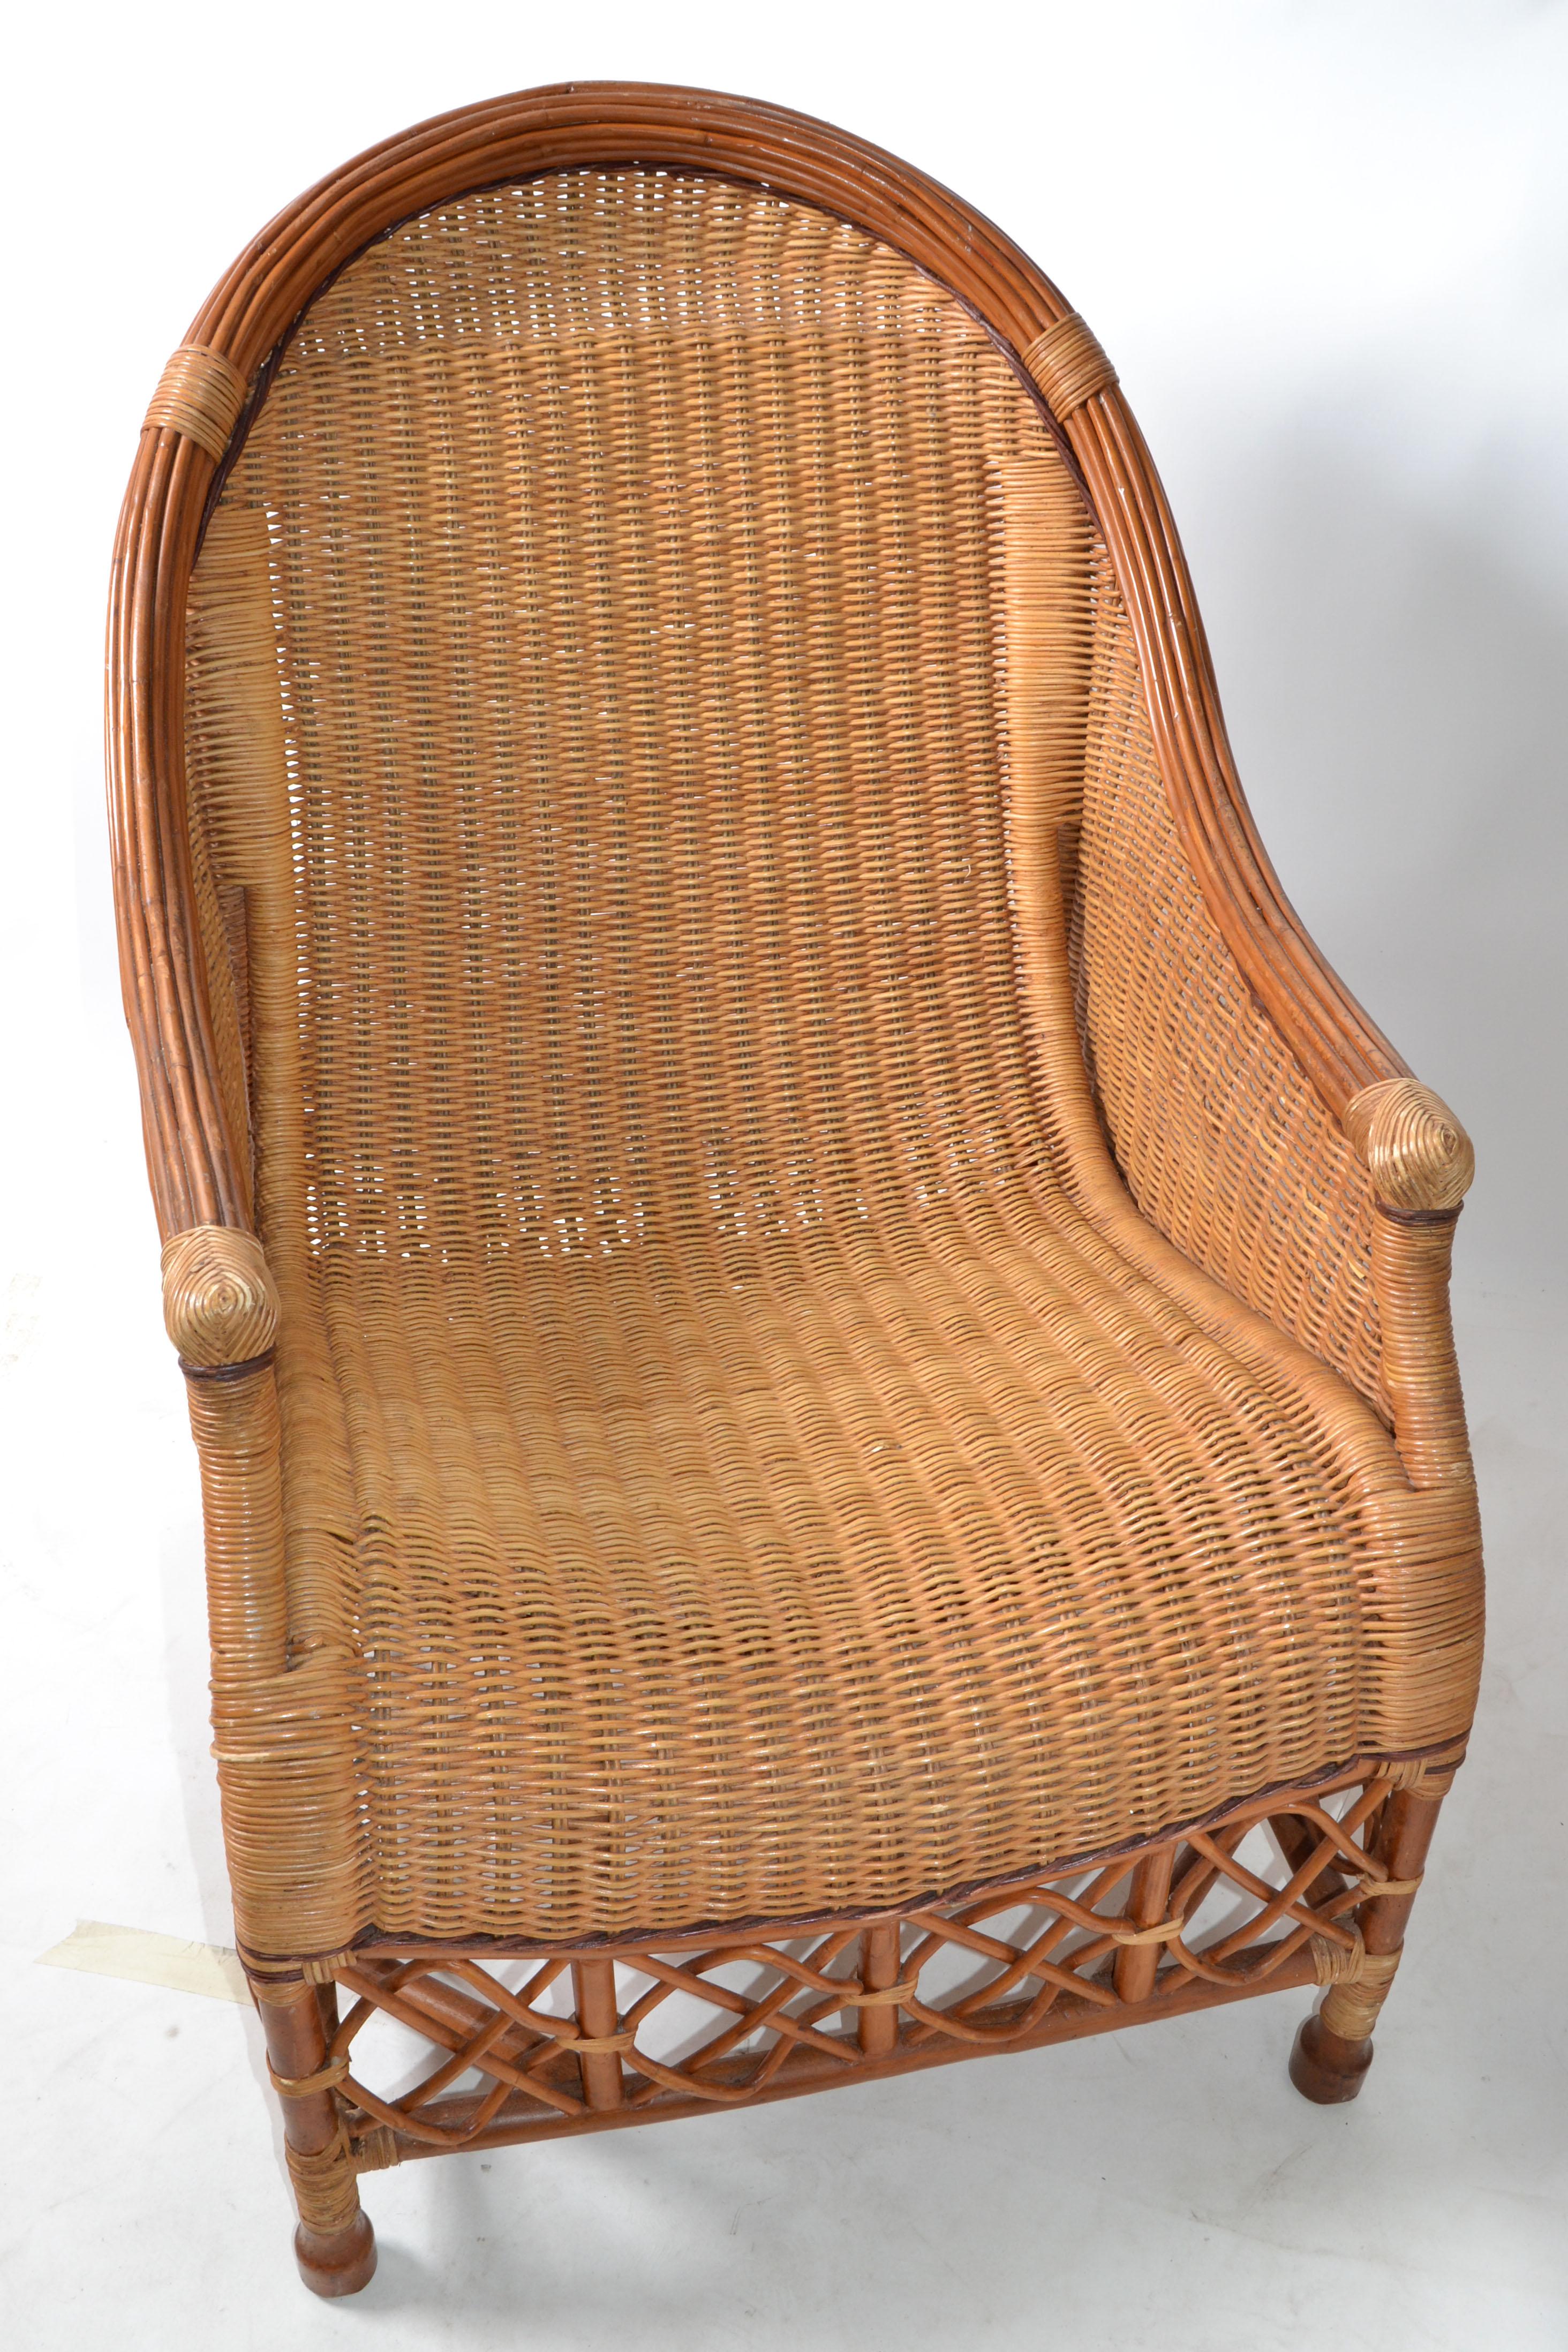 Hand-Crafted Bamboo, Cane & Wicker Lounge Chair Handwoven Bohemian 1960 Mid-Century Modern For Sale